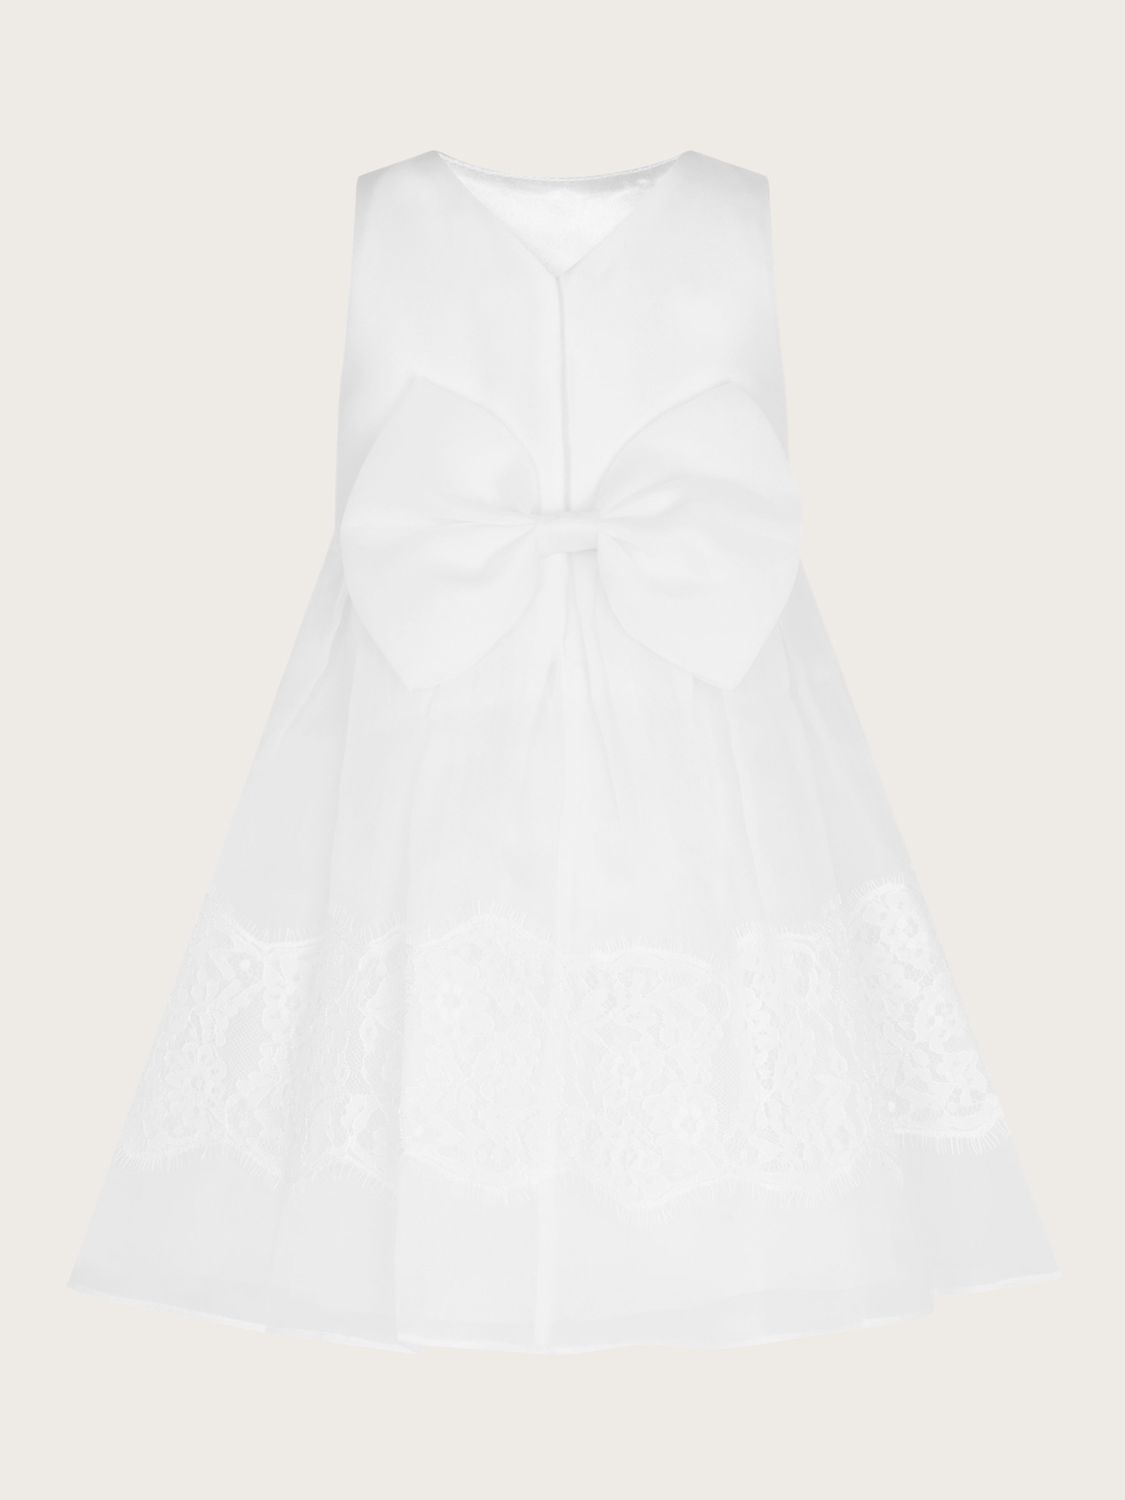 Monsoon Baby Alovette Hope Lace Christening Dress, White, 0-3 months